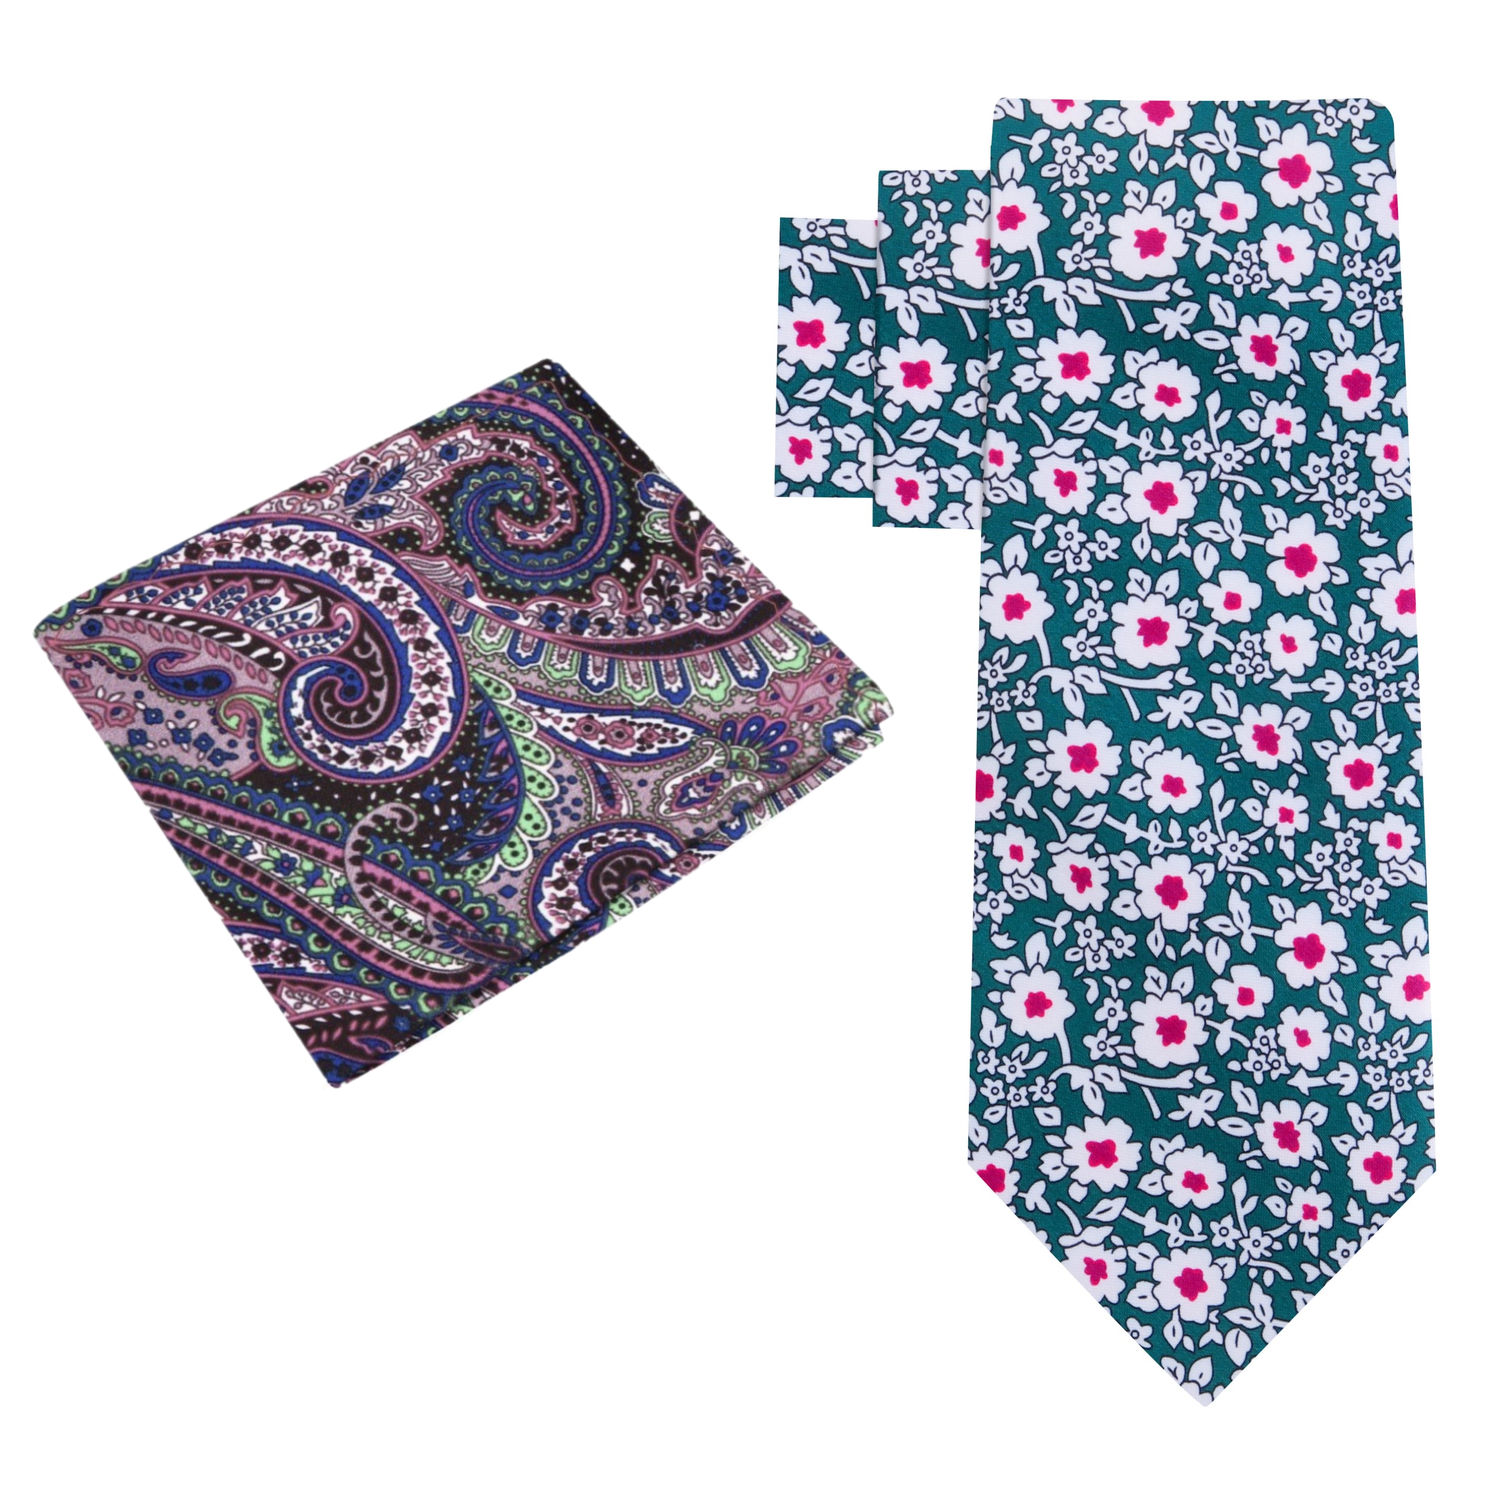 Alt View: Green, White, Pink Small Flowers Necktie and Accenting Paisley Square